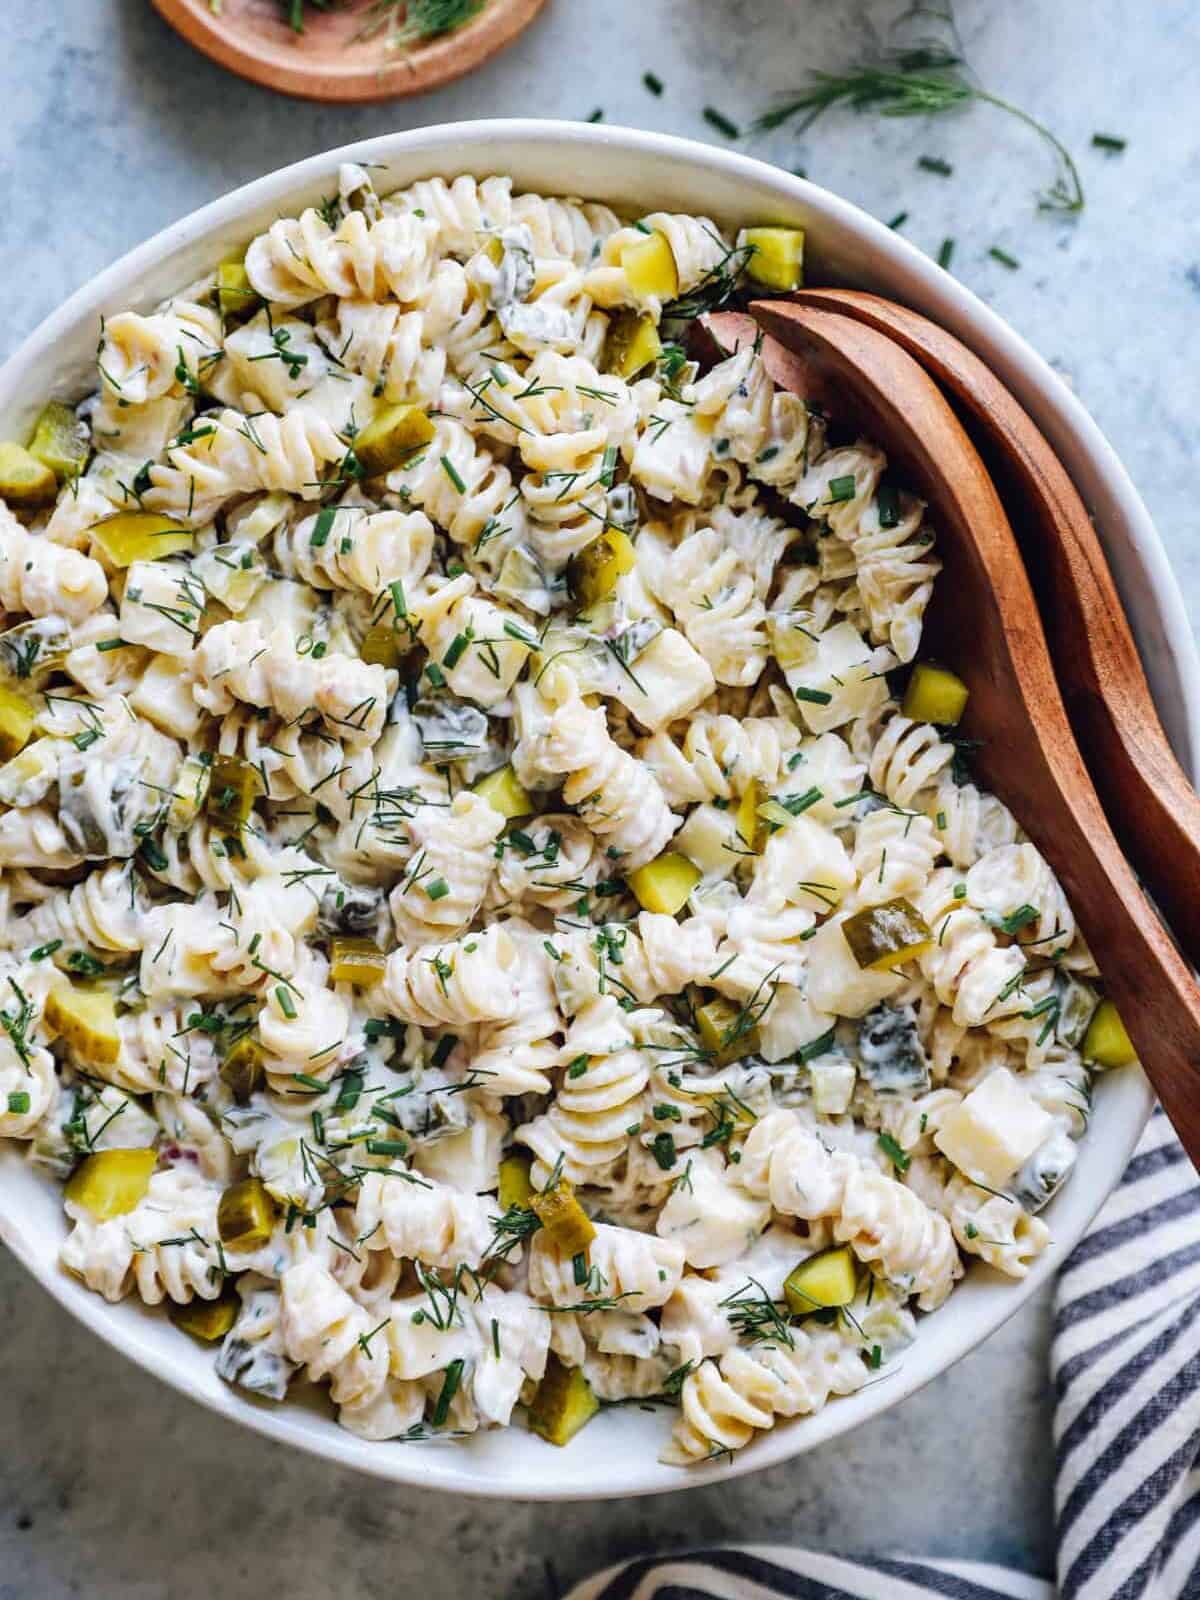 Creamy Pasta Salad with Salad Toppins